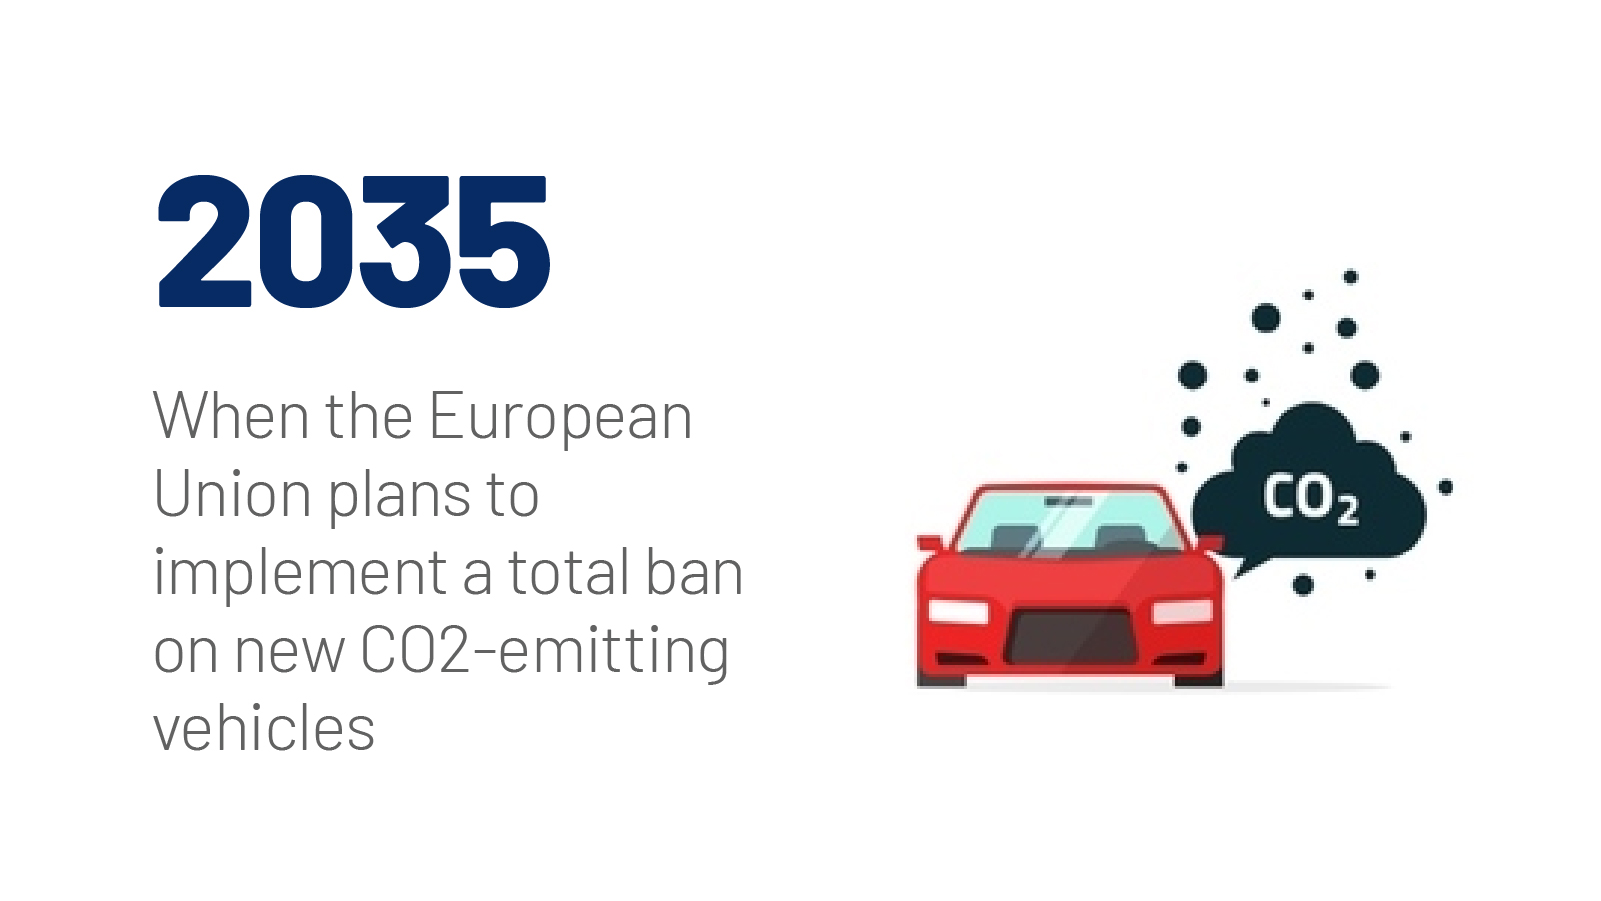 The European Union plans to implement a total ban on new CO2-emitting vehicles by 2035